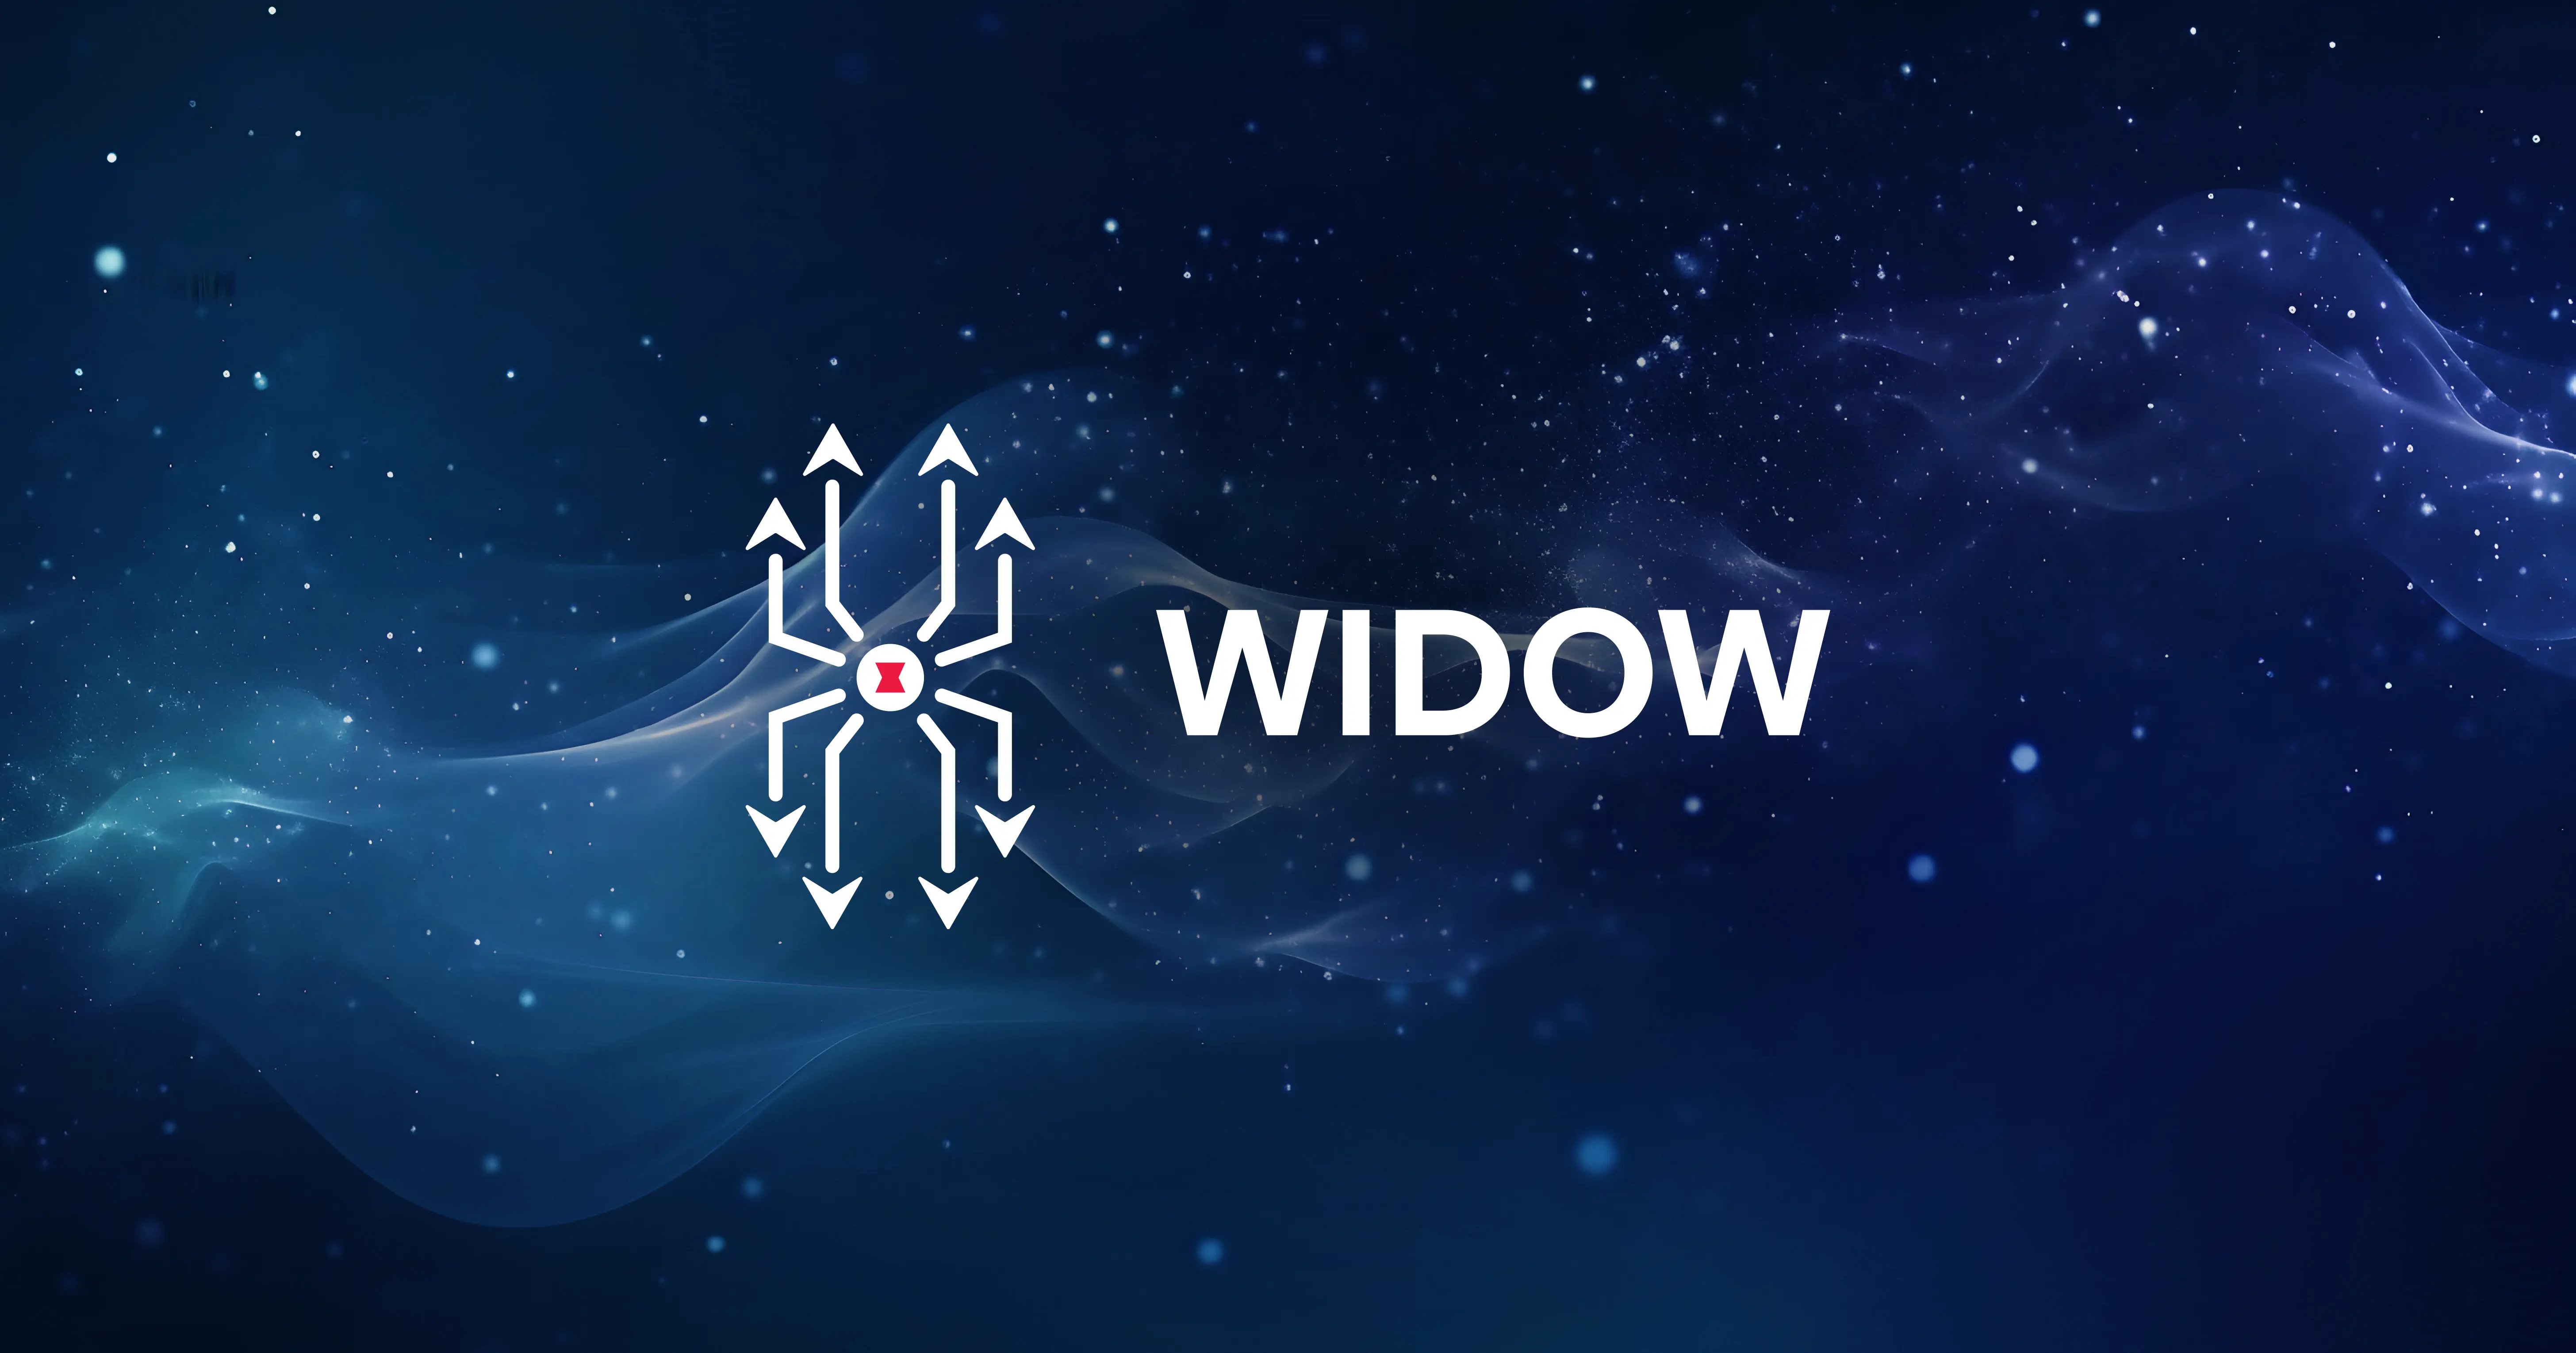 WIDOW Enabling Warfighters through Direct Access to Developers